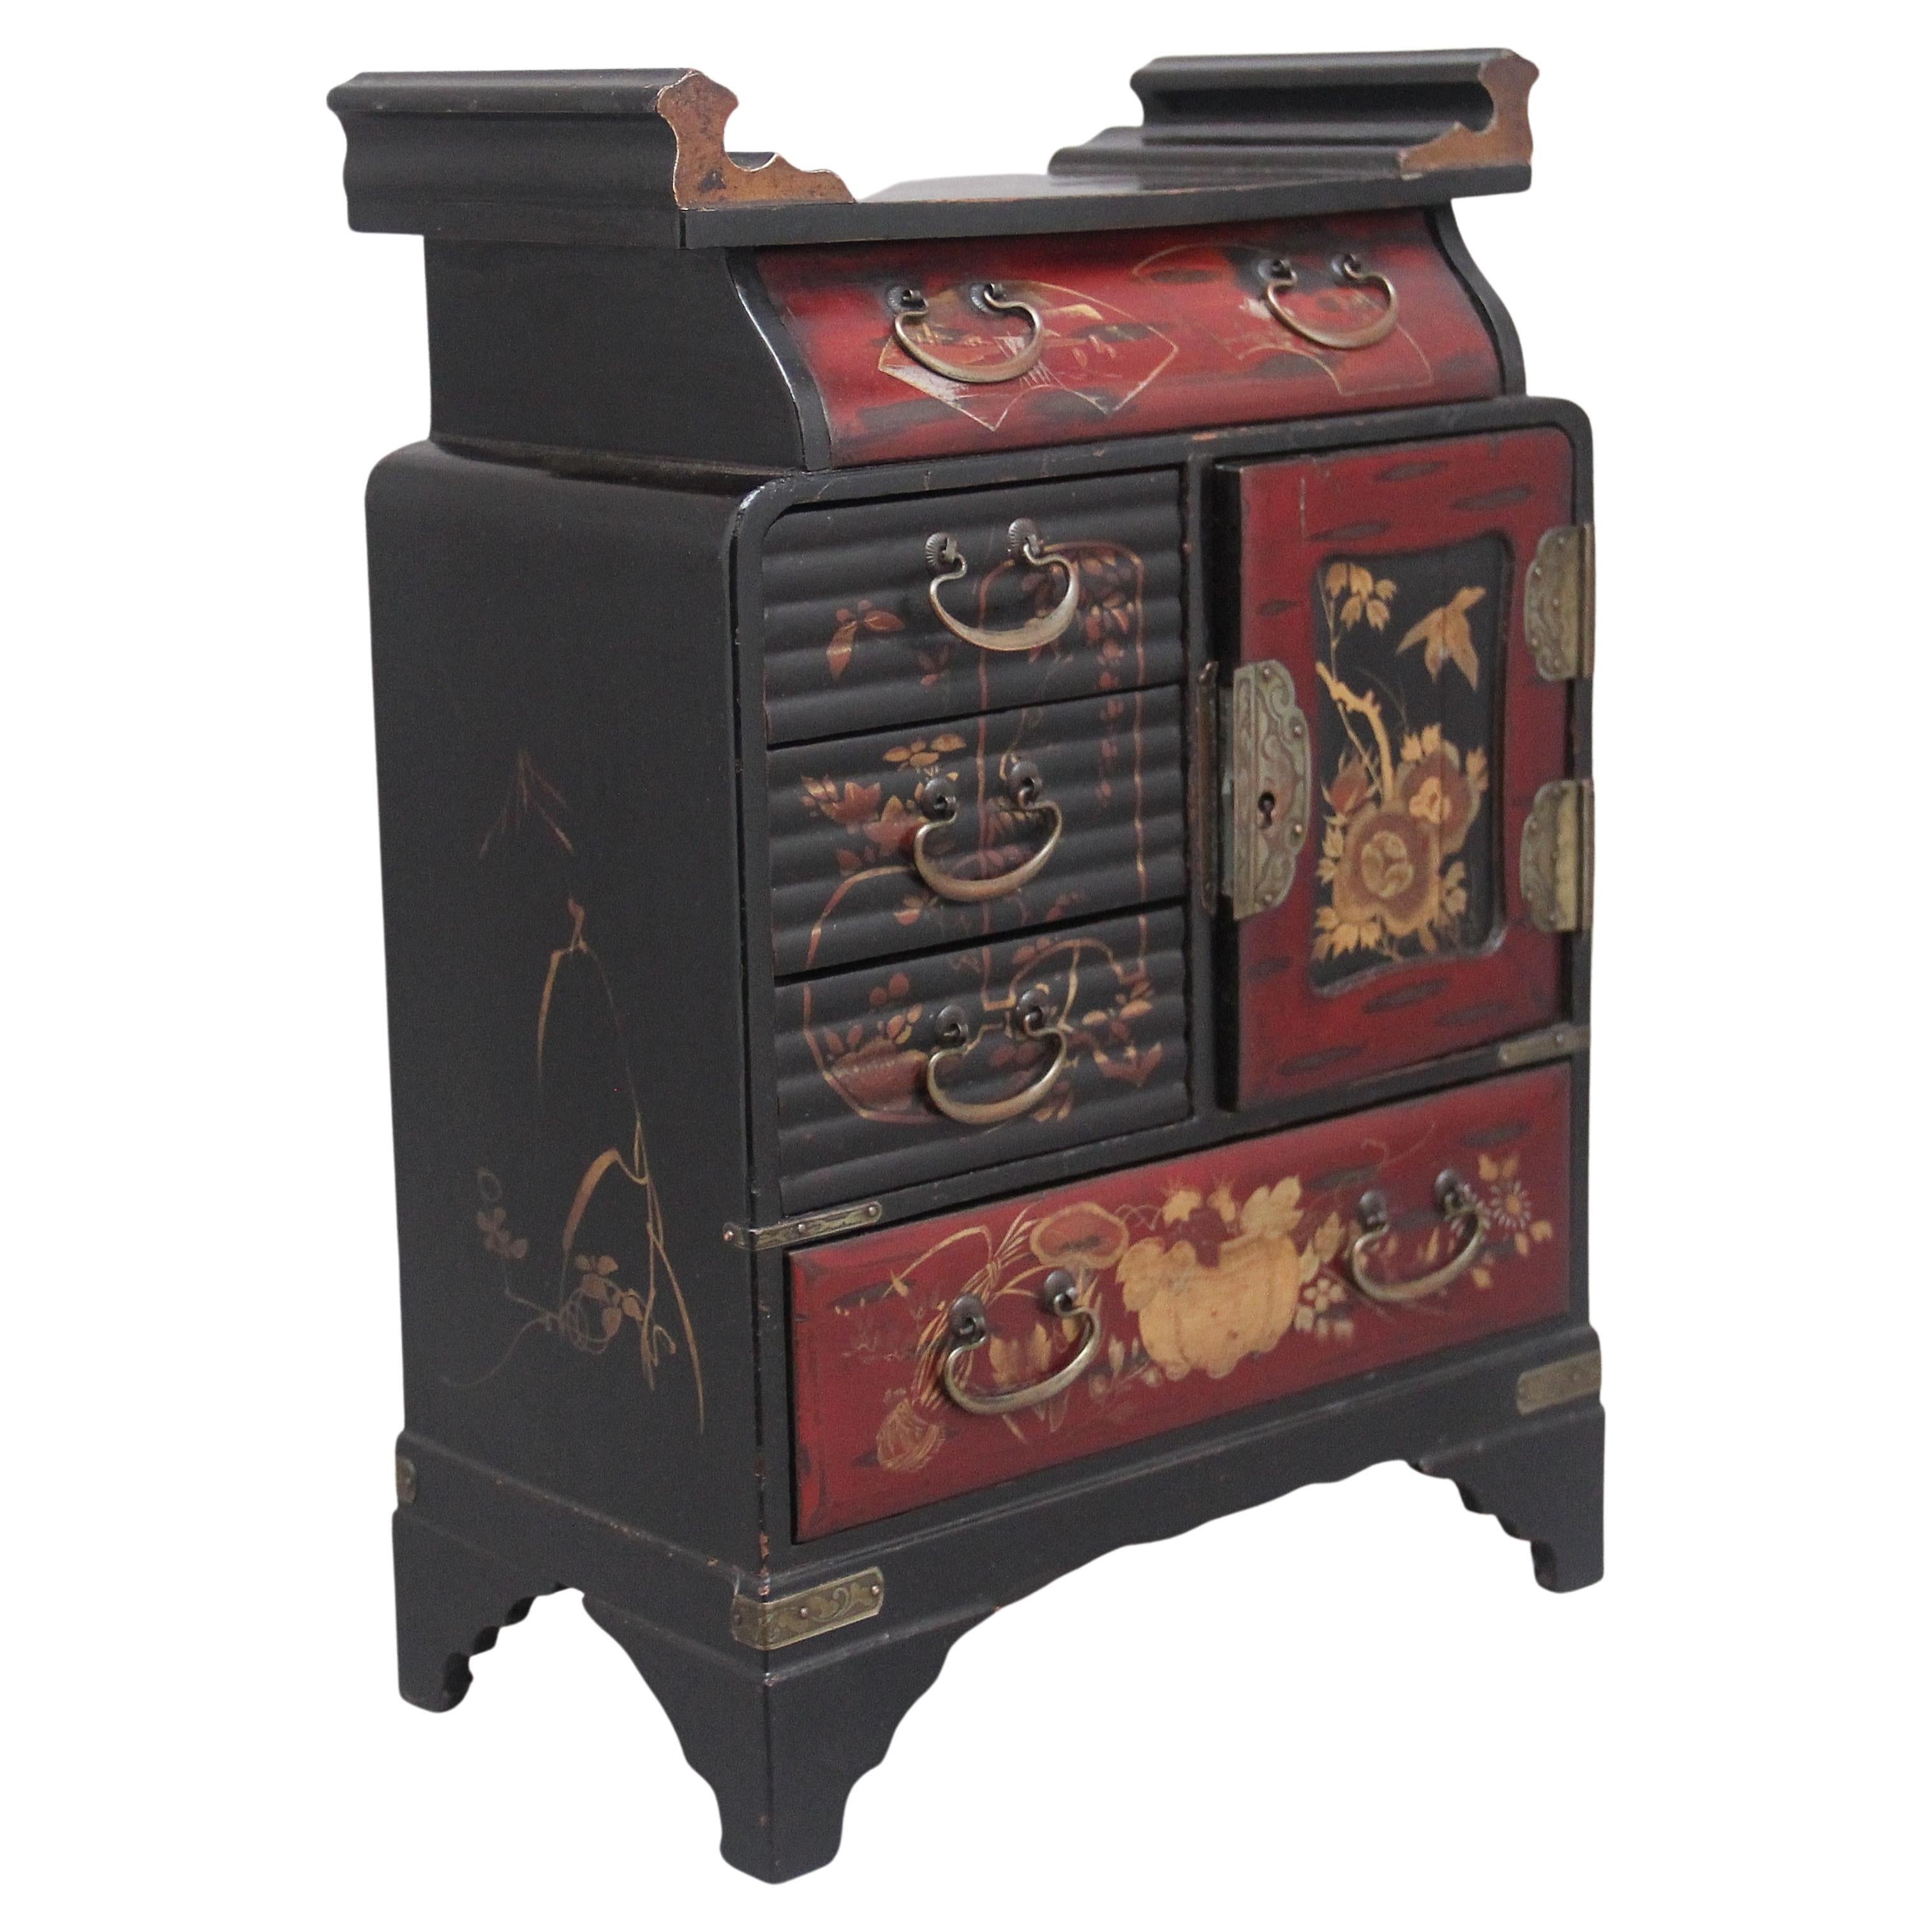 19th Century Japanese lacquered table cabinet from the Meiji period